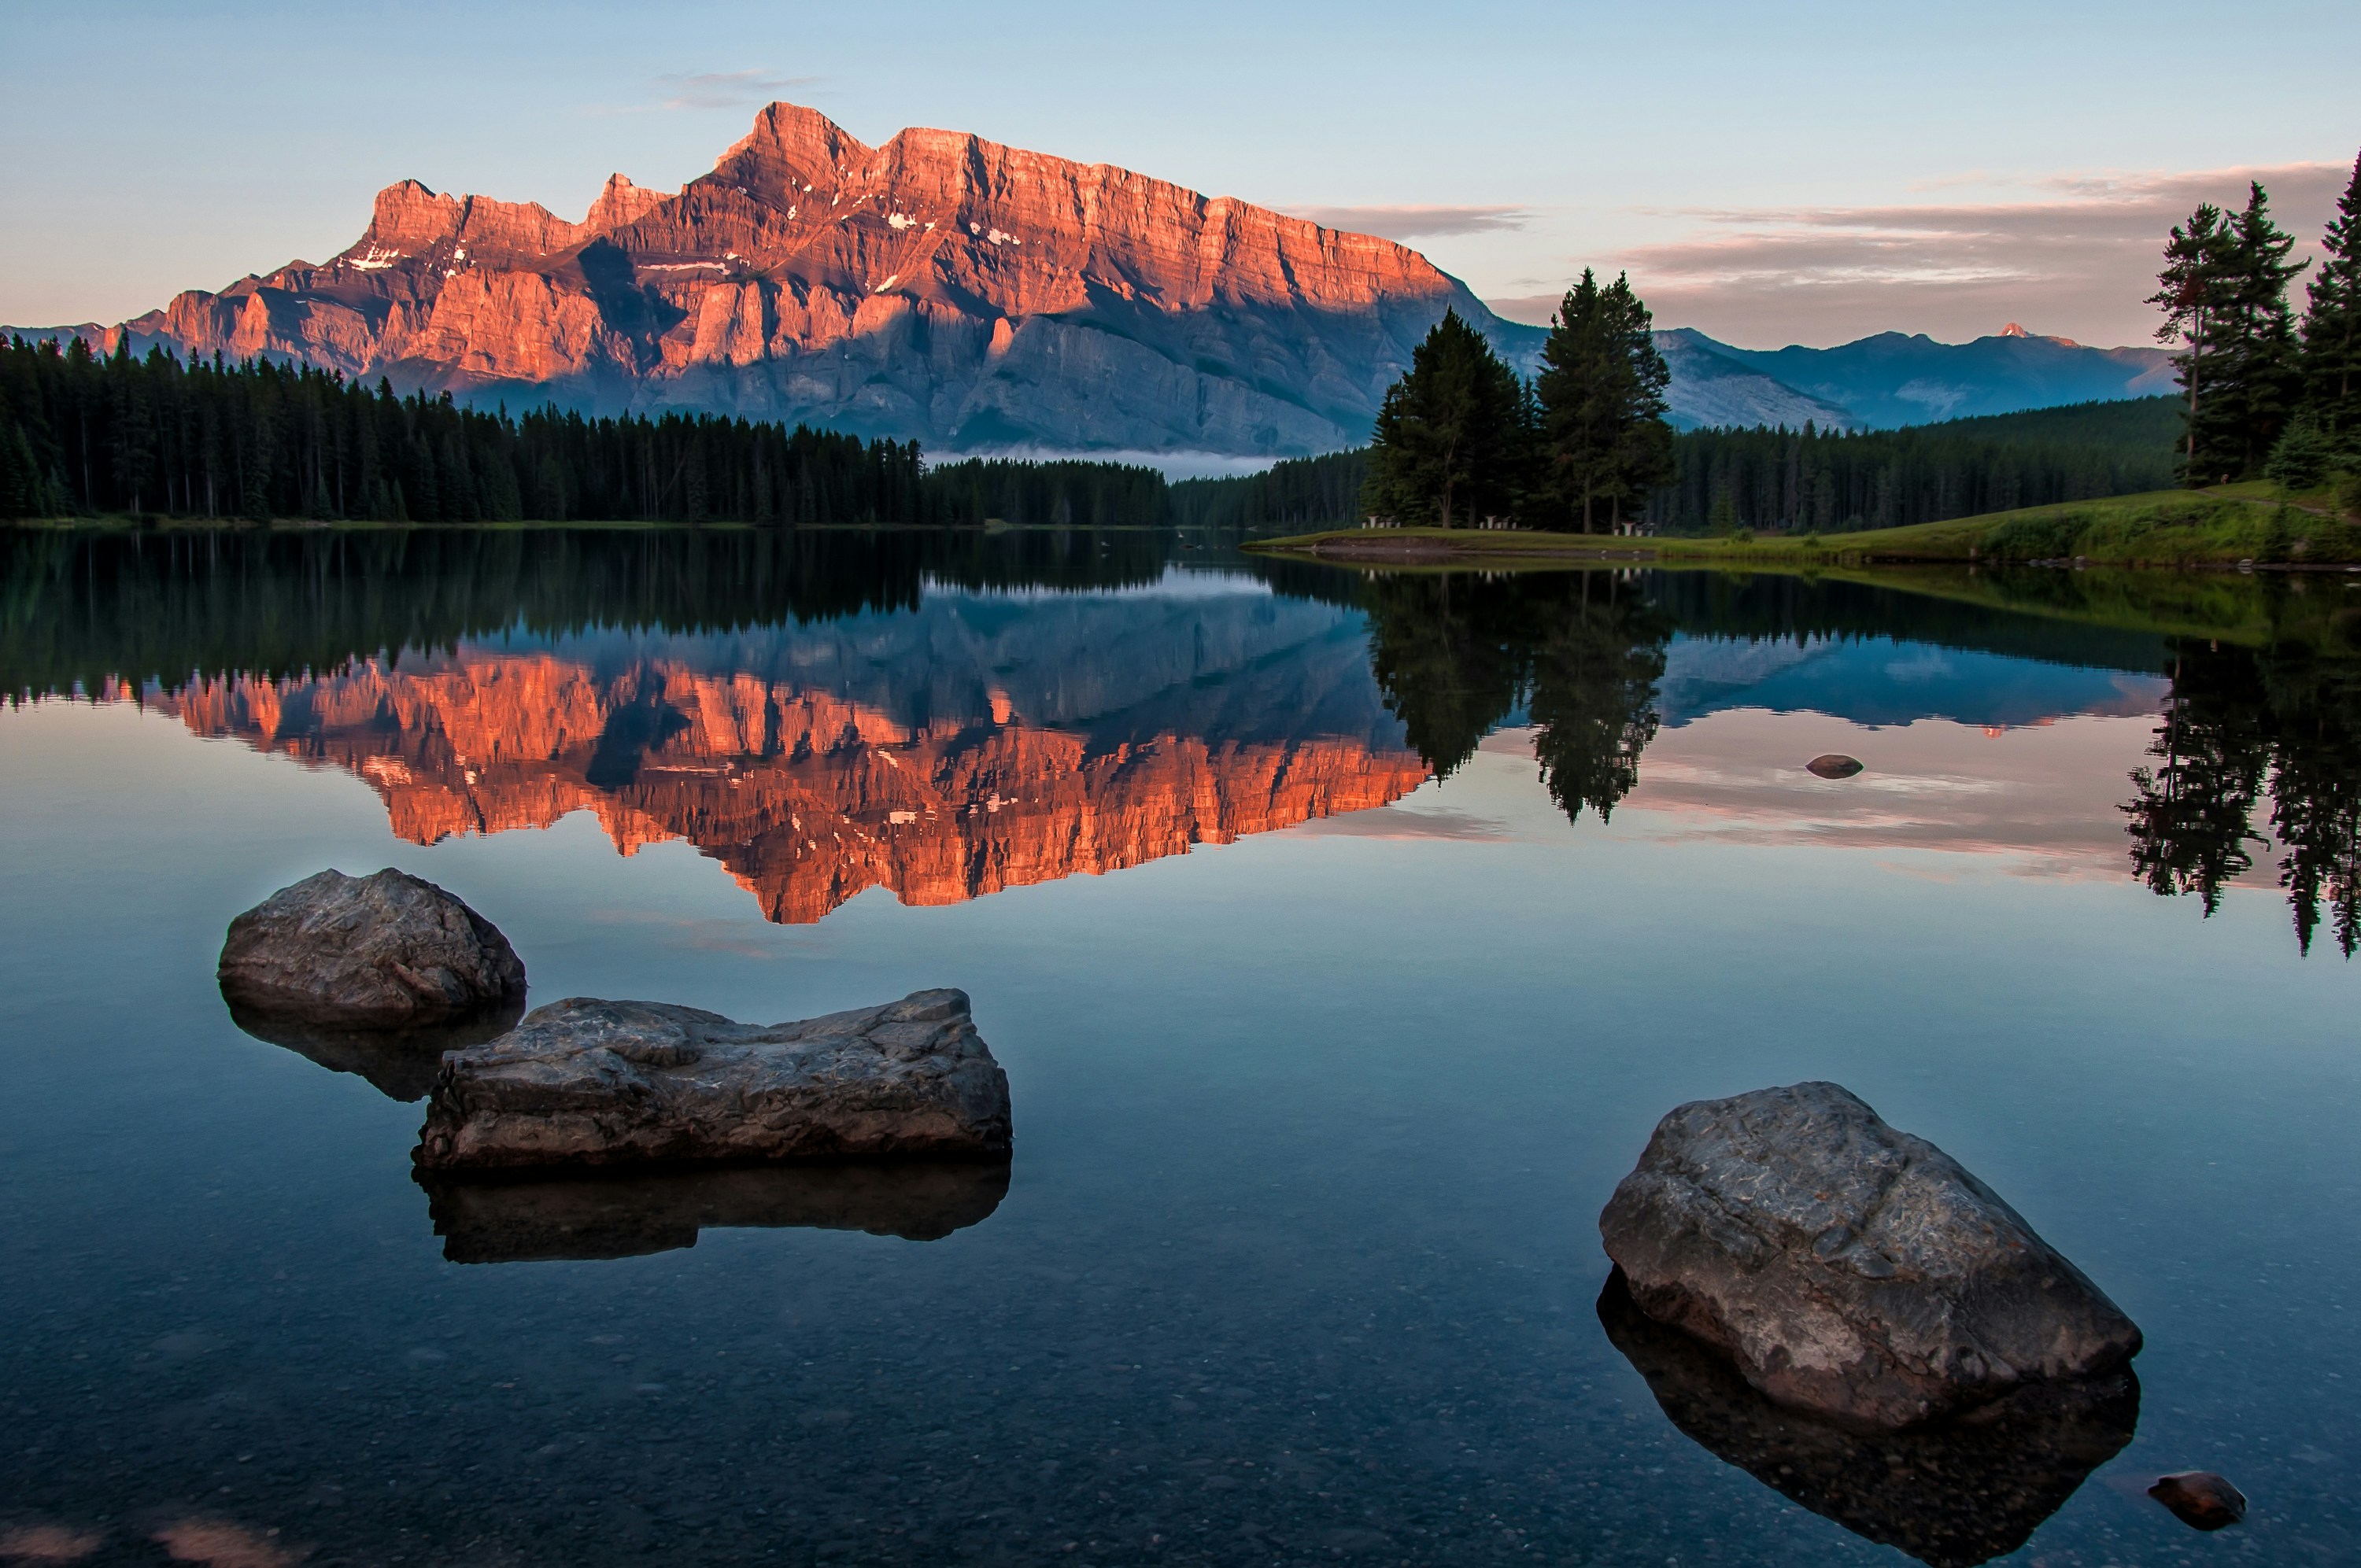 great photo recipe,how to photograph there is something about a huge mountain reflection in a lake that just puts you at ease. here is another picture from my trip to the canadian rockies. lake minnewanka at sunrise.; mountain reflection on body of water